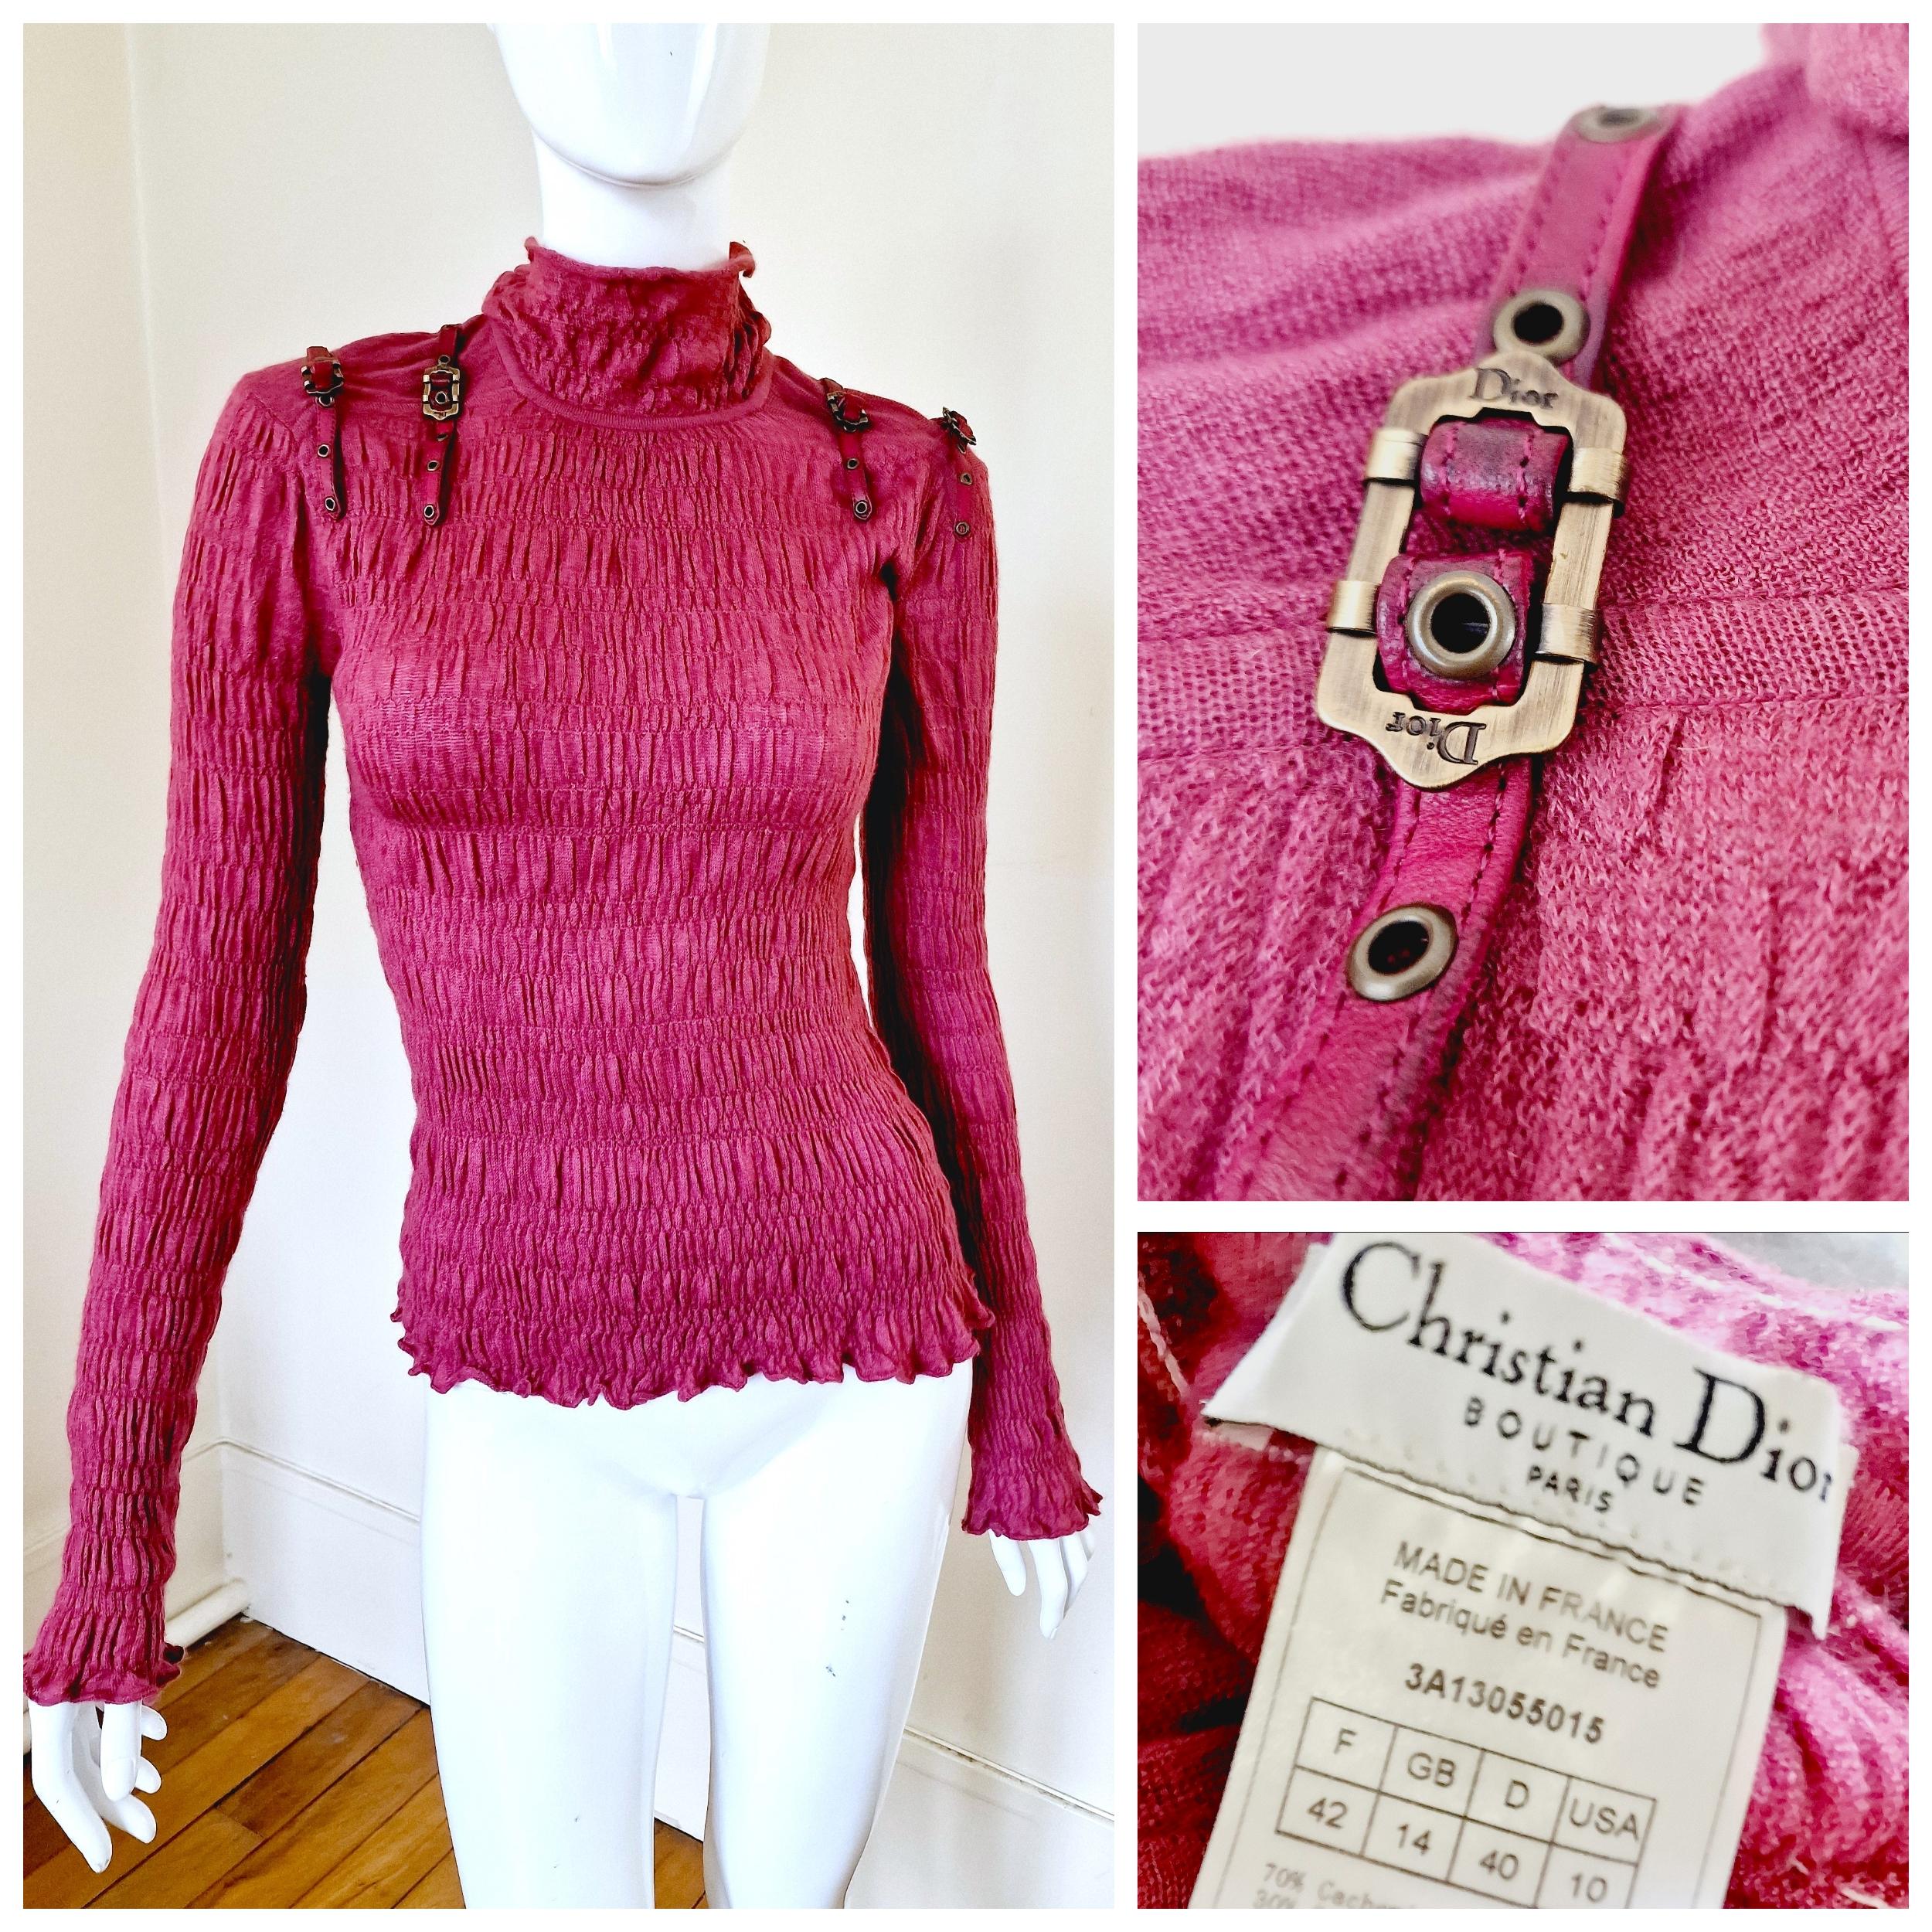 Bondage straps top by Dior!
70% cachmire, 30&% silk! 
Super soft tounch! 
2-2 Dior signed metal straps on the shoulders! 

VERY GOOD condition!

SIZE
Women: Fits from M to L.
Marked size: FR42 / GB14 / D40 / USA10.
Stretchy fabric.
Length (front):